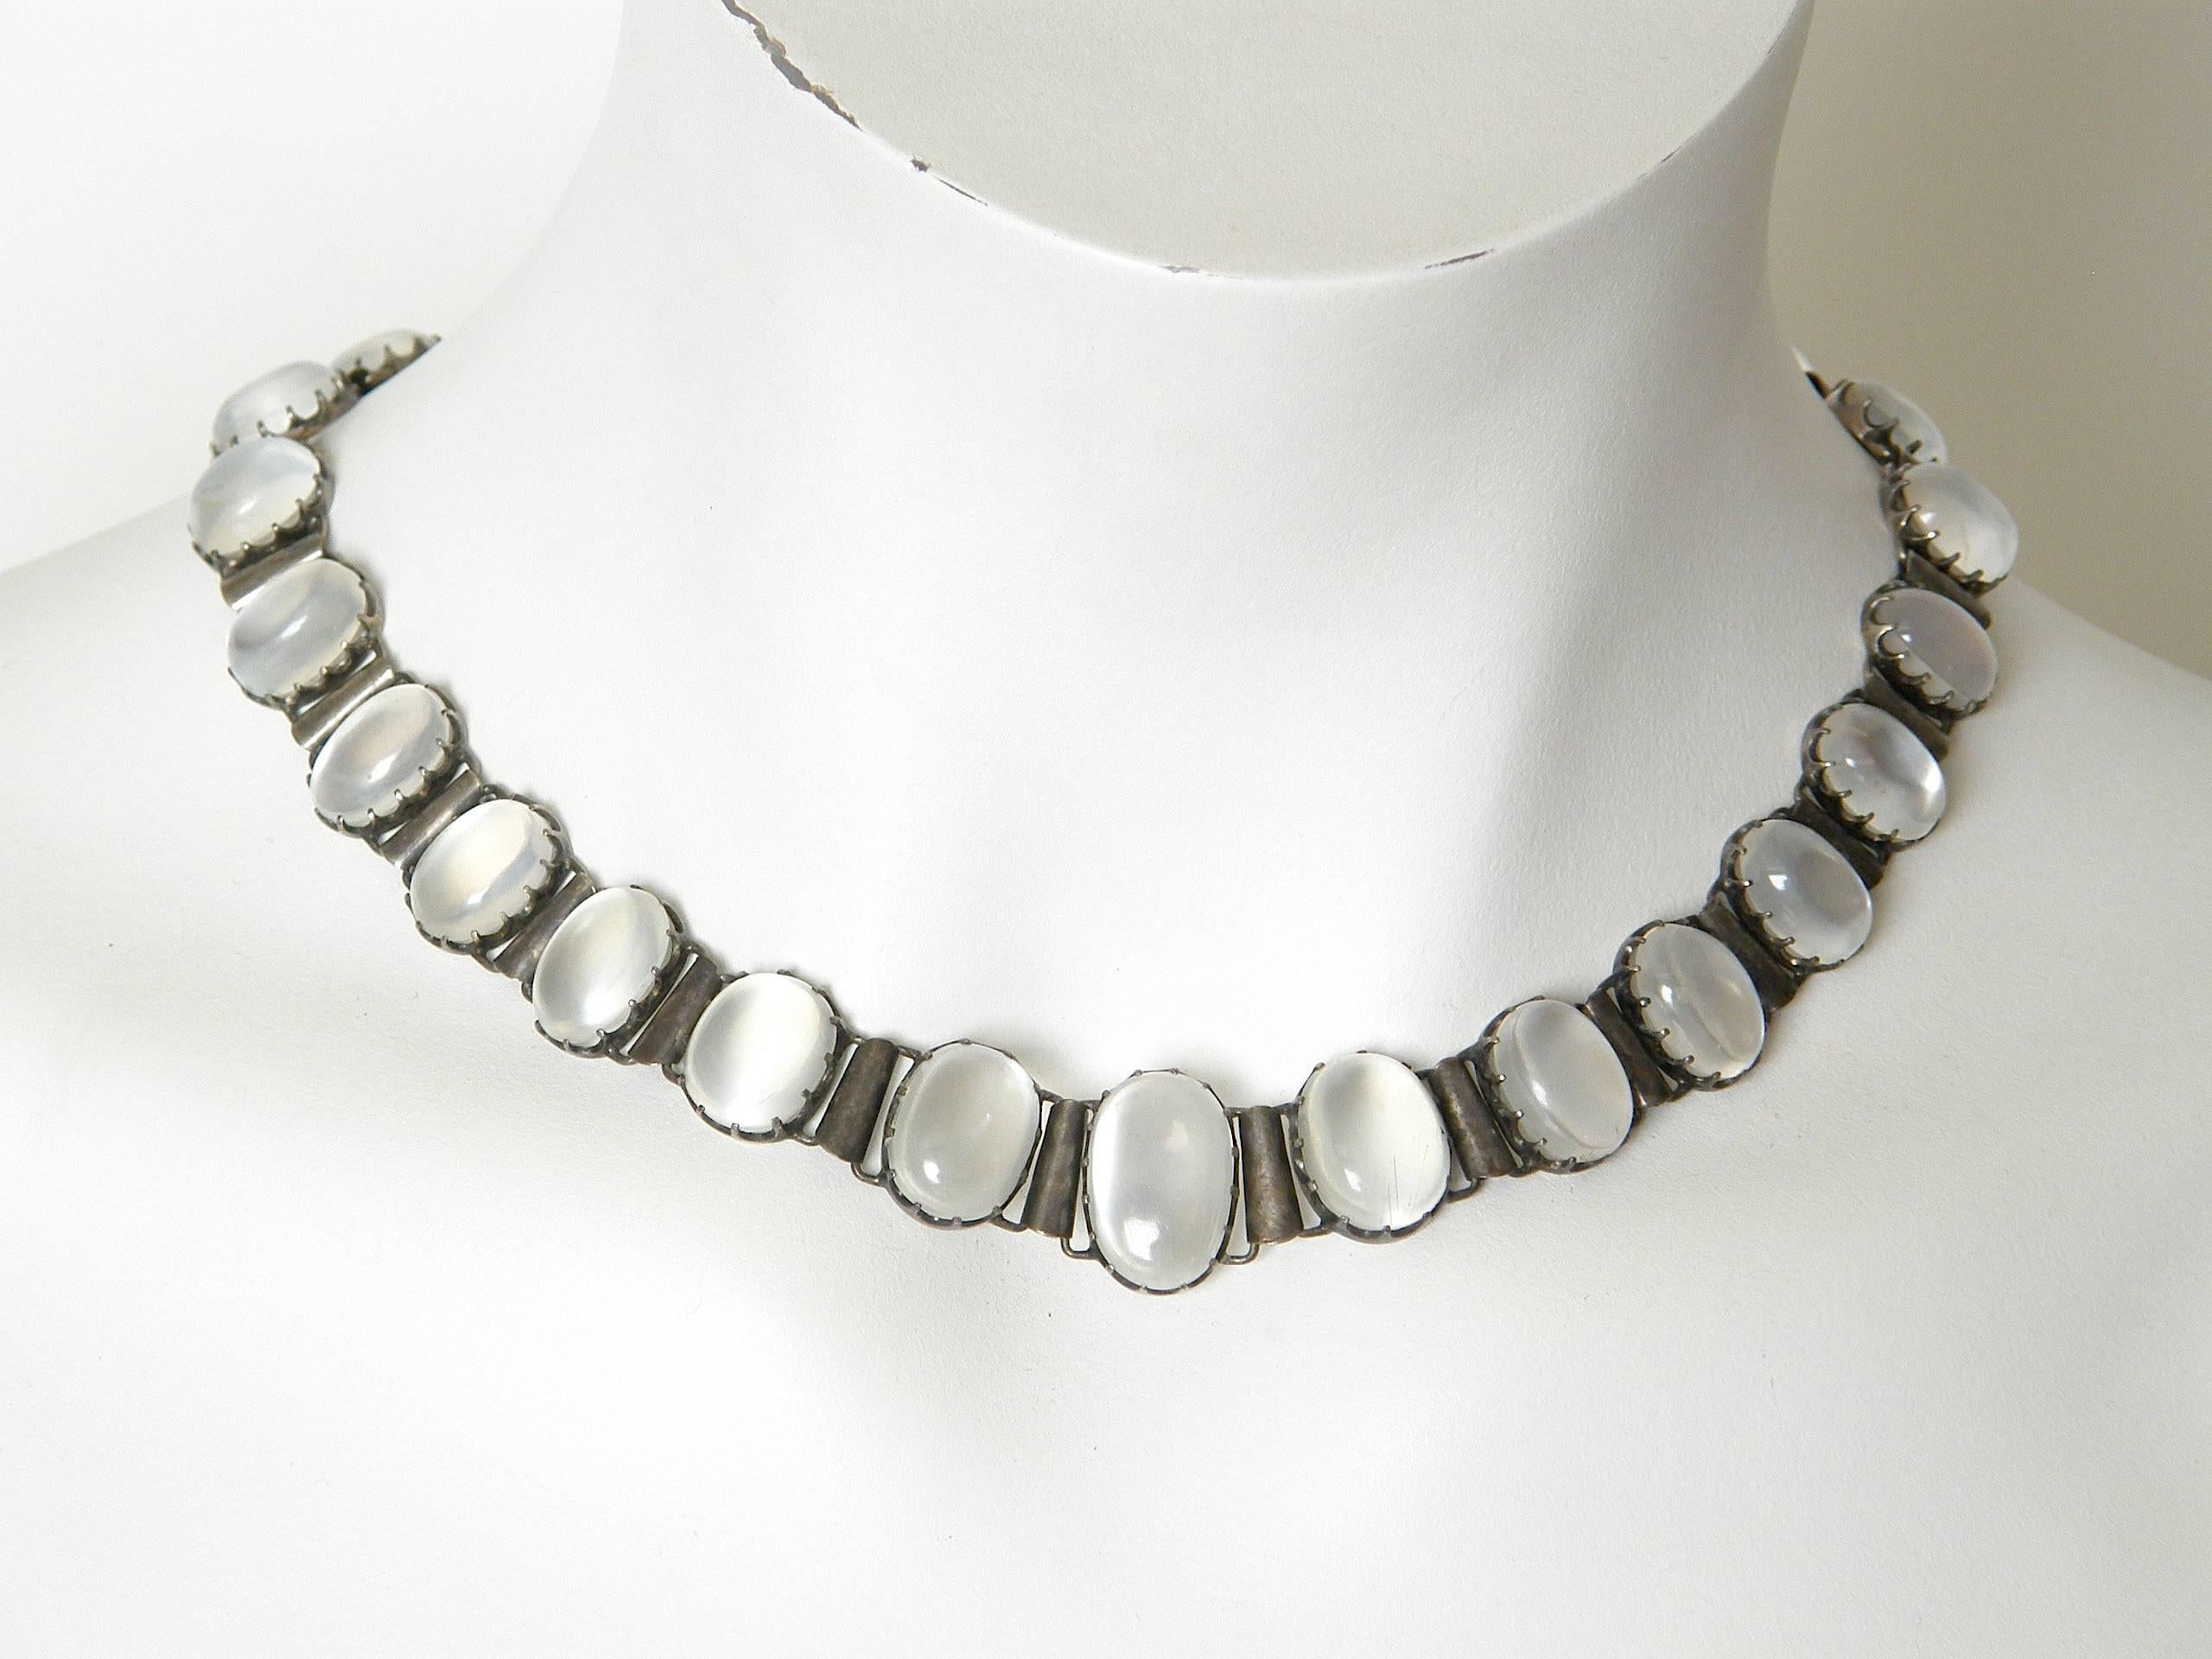 This ethereal choker necklace features 26 cabochon moonstones of varying sizes. The stones are held in place by multiple prongs, with a scalloped effect to the settings. The necklace is unmarked, but it tests for sterling. 

Please contact us if you